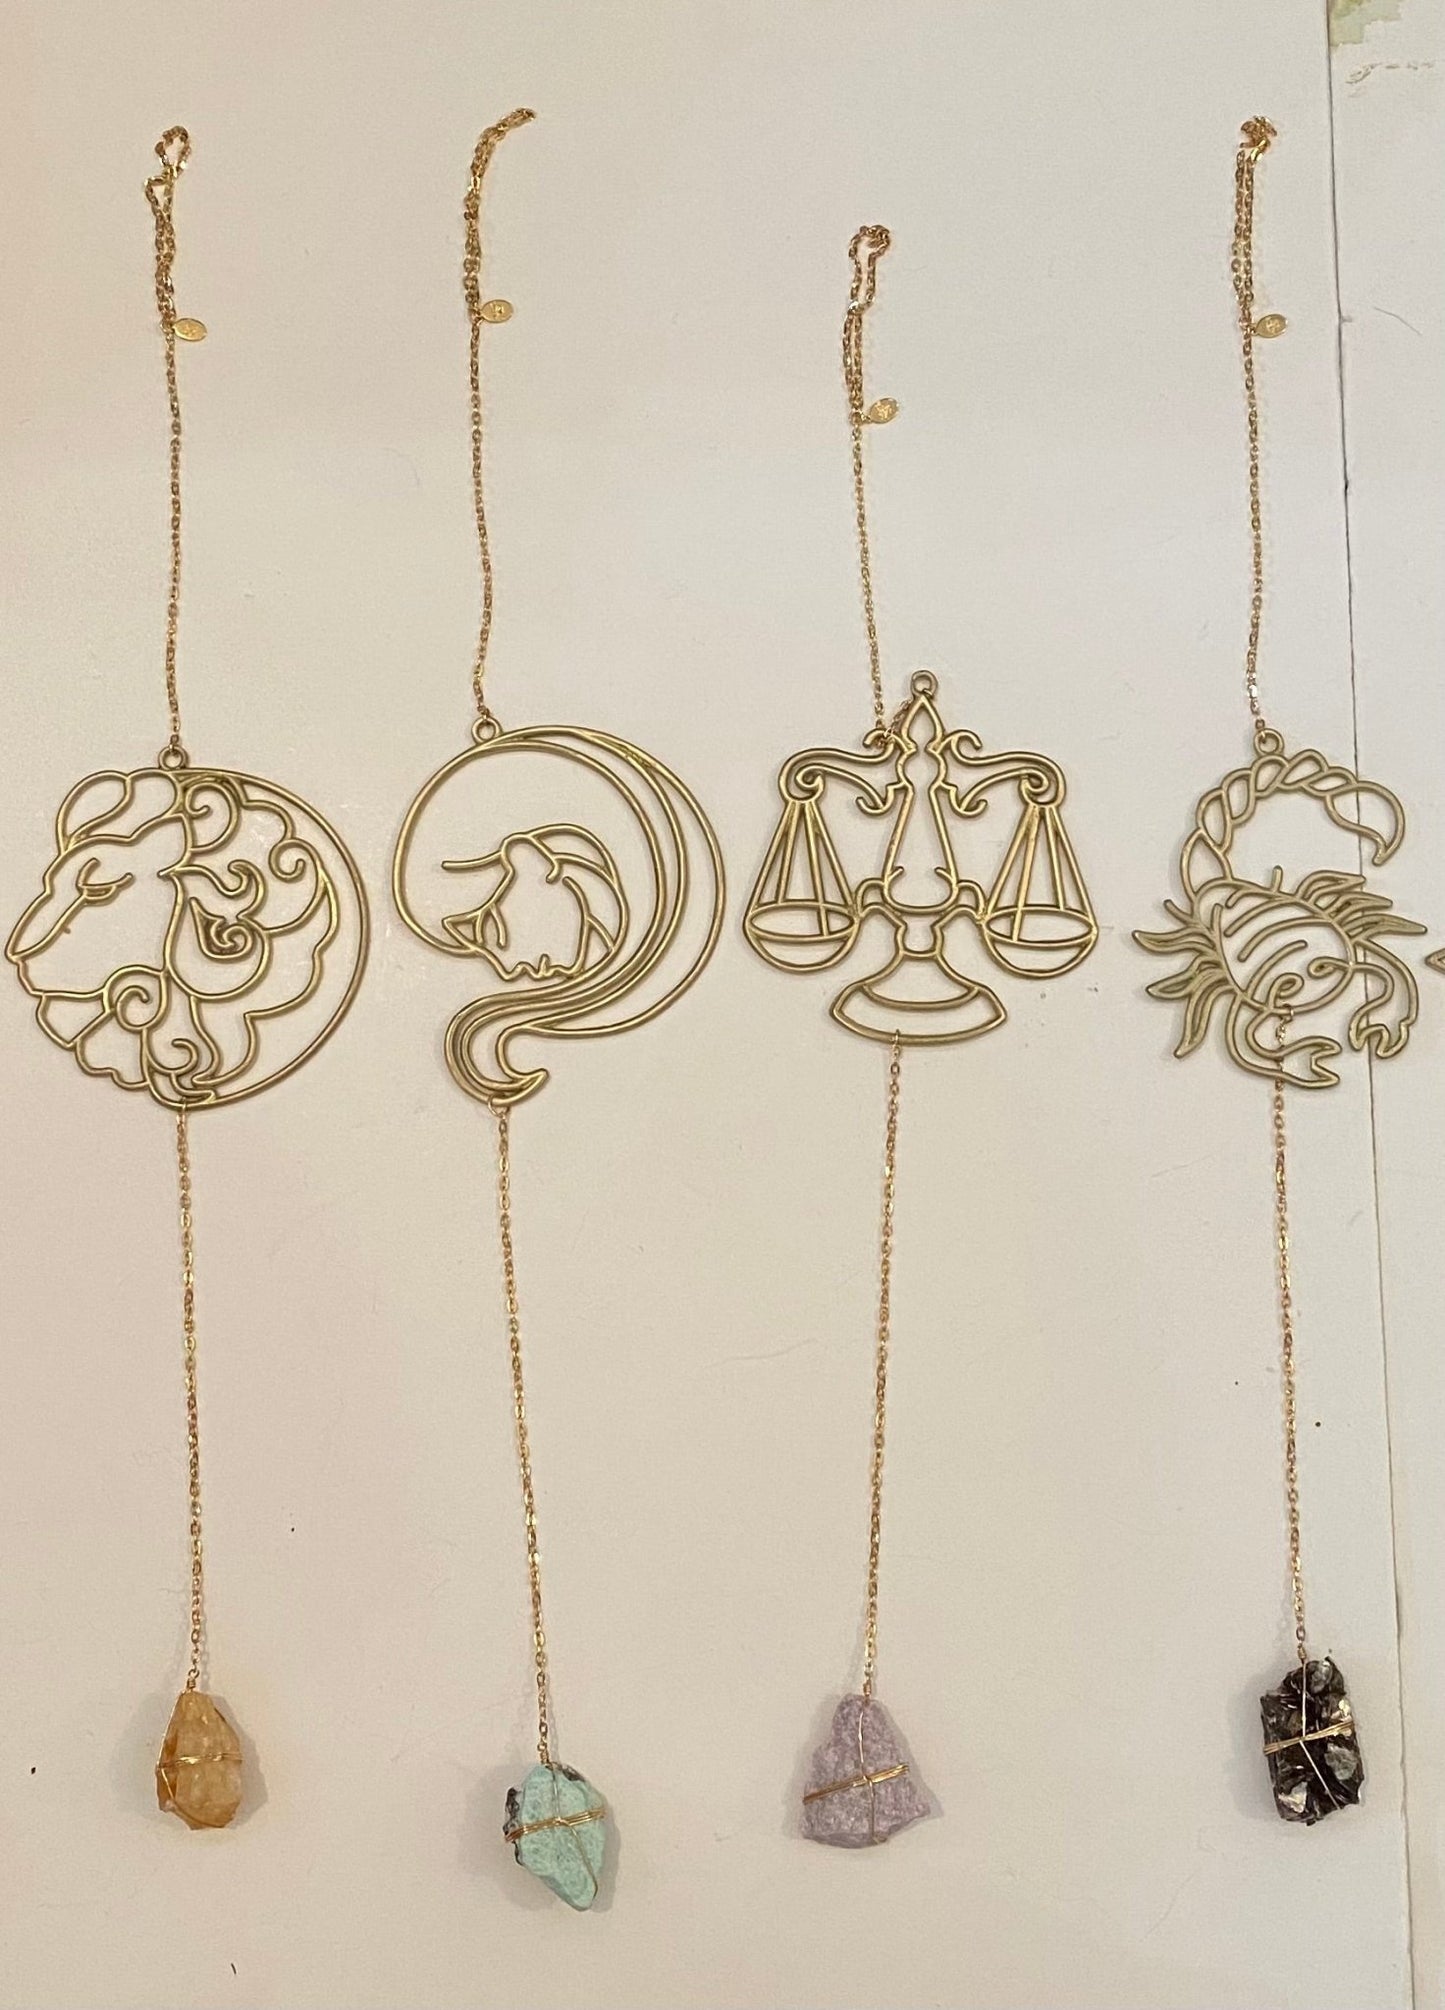 Zodiac Silhouette and Crystal Wall Hanging - Ariana Ost